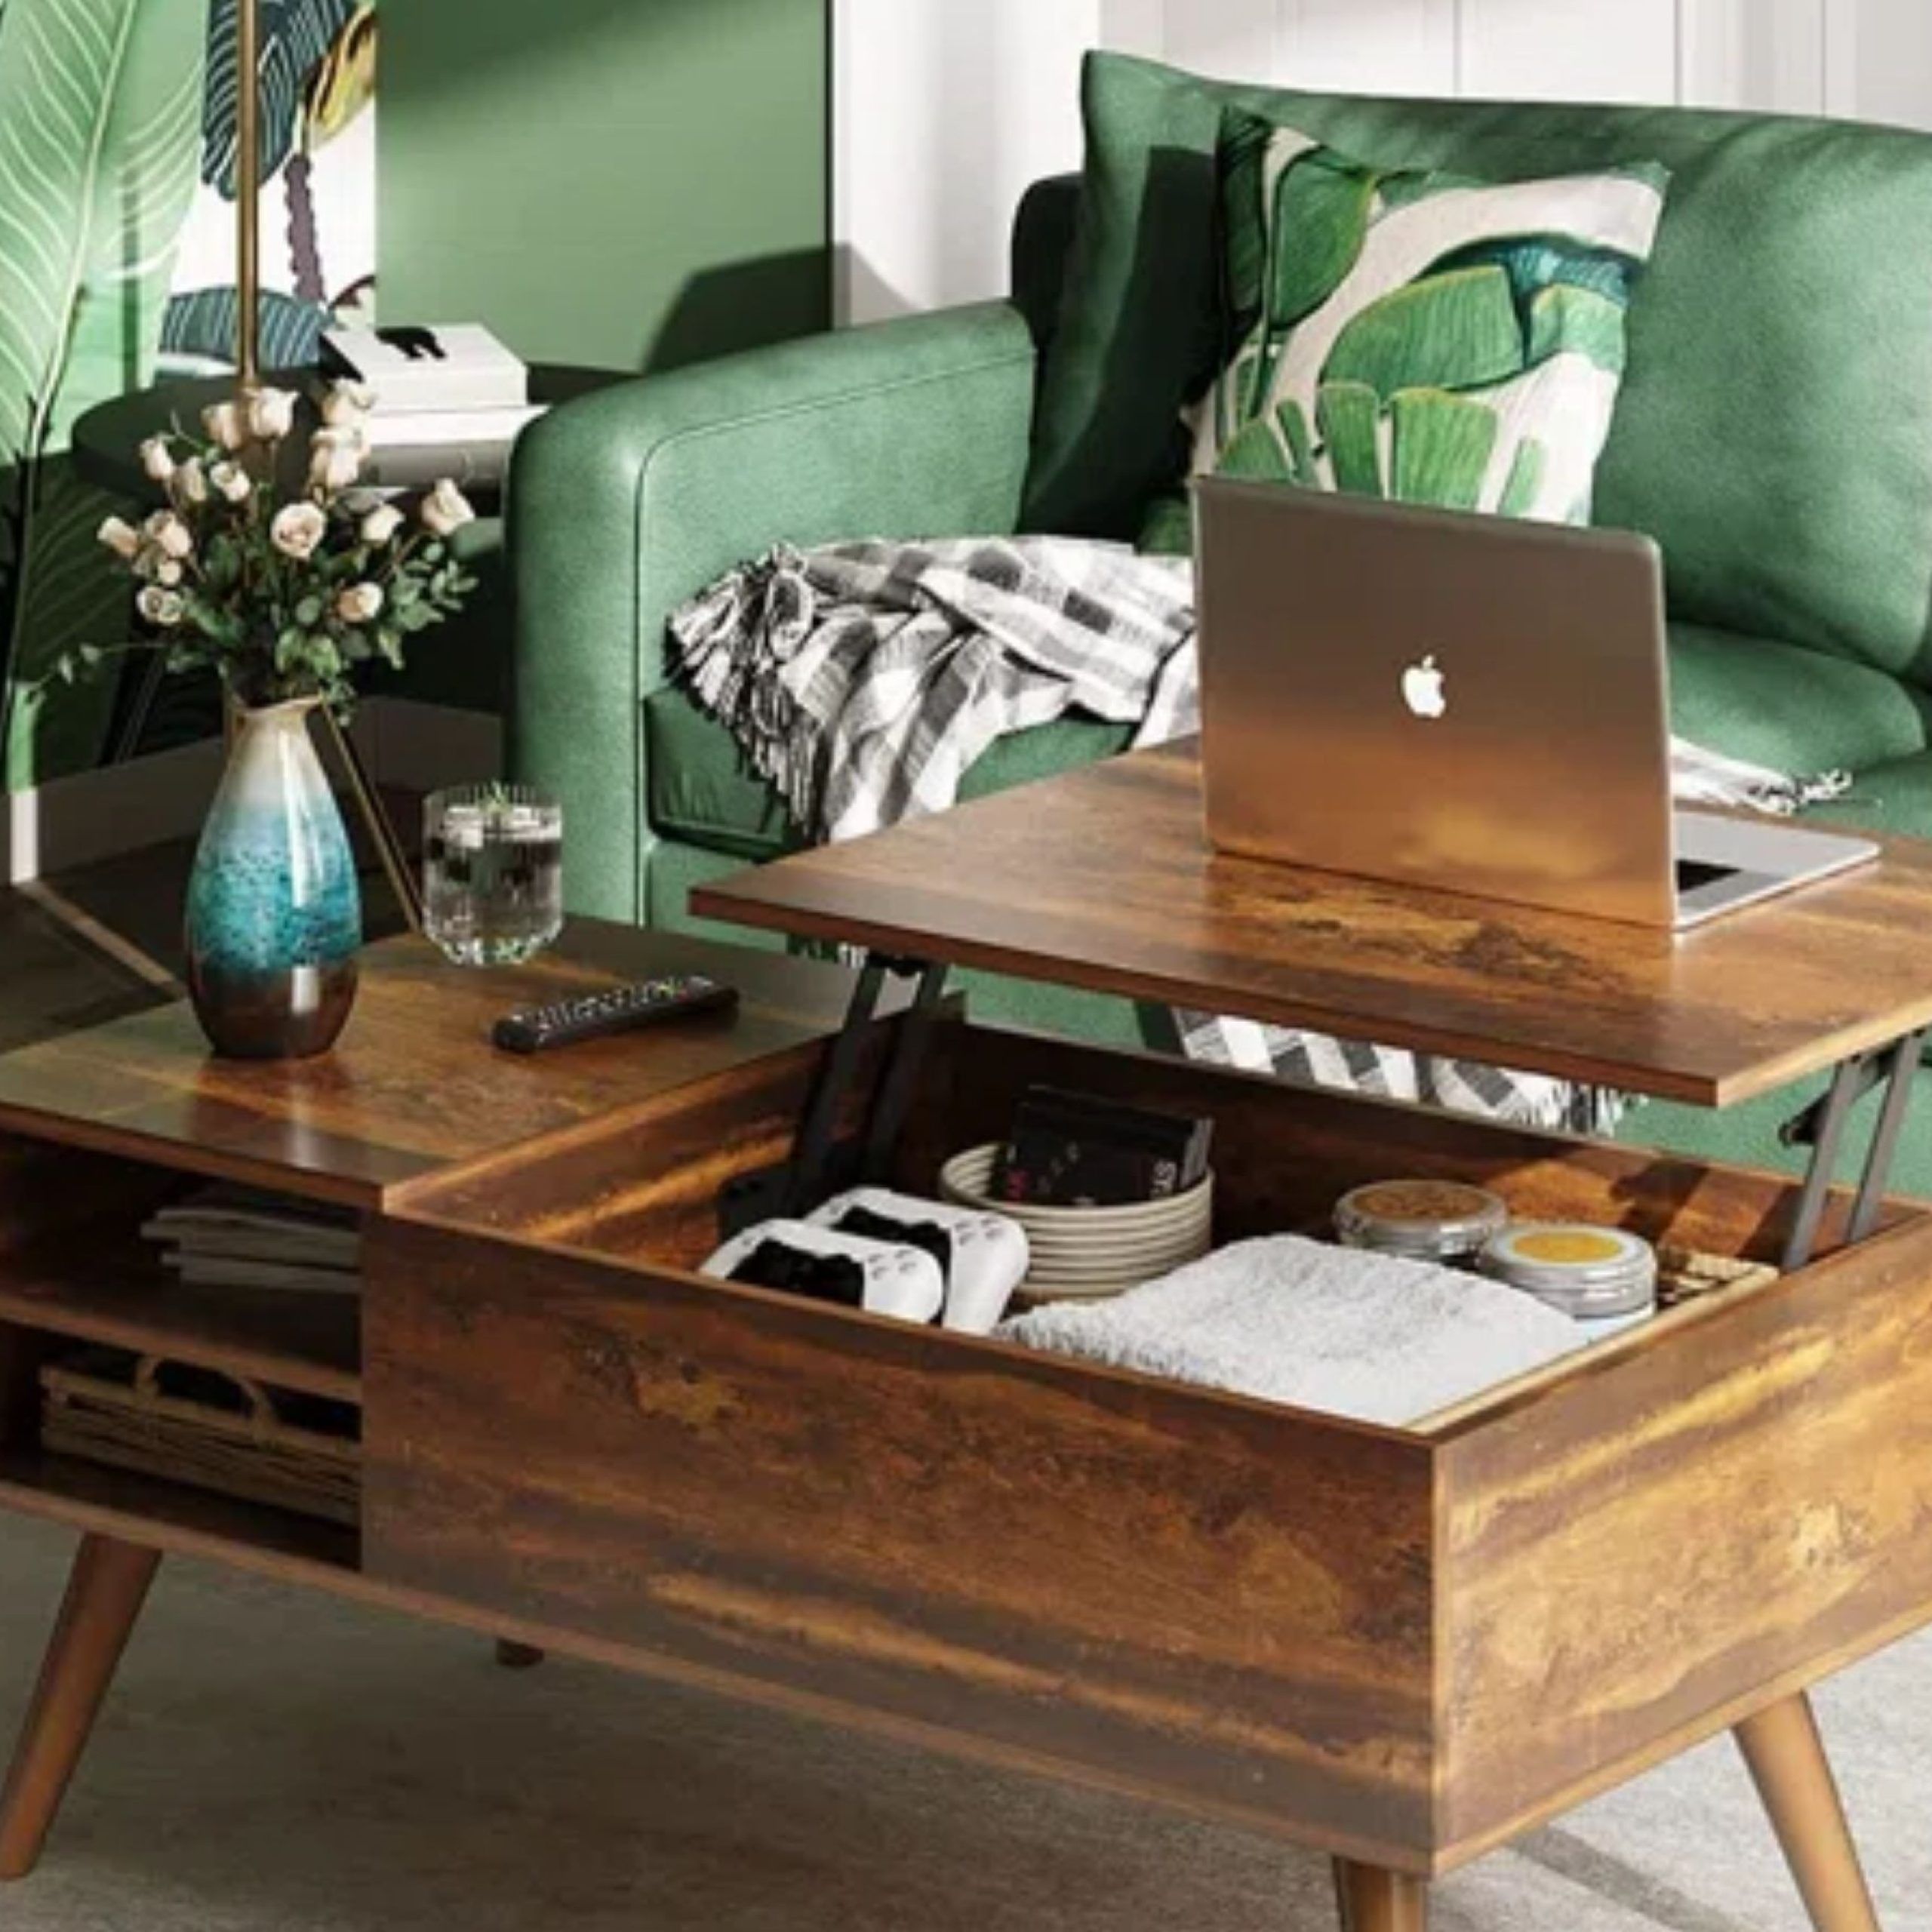 Best Lift Top Coffee Tables: 14 Buys Perfect For Small Spaces | Real Homes Throughout Lift Top Coffee Tables (View 11 of 15)